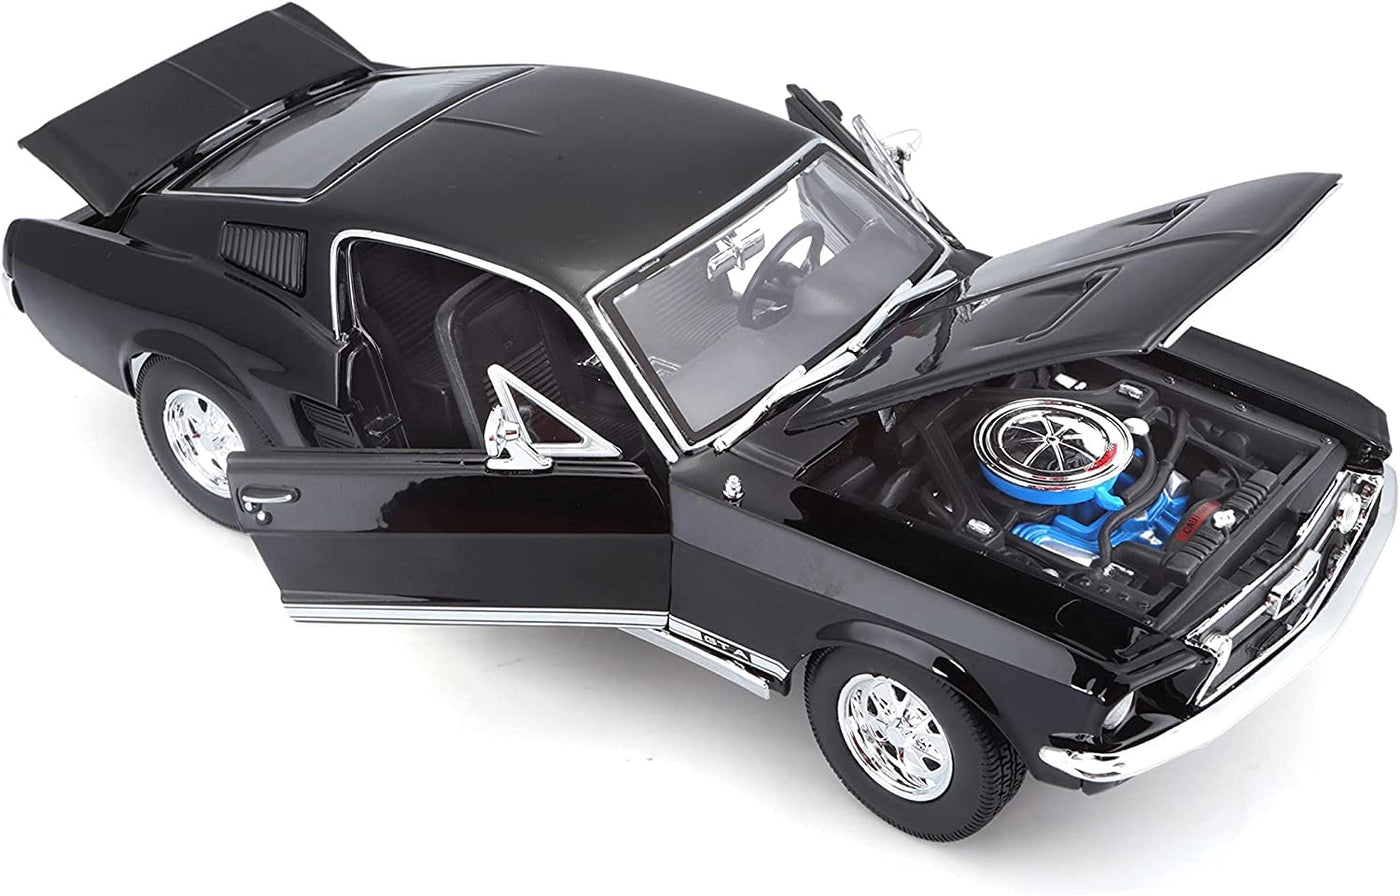 1967 Ford Mustang GTA Fastback - Black Die-Cast Scale Model (1:18) | Maisto